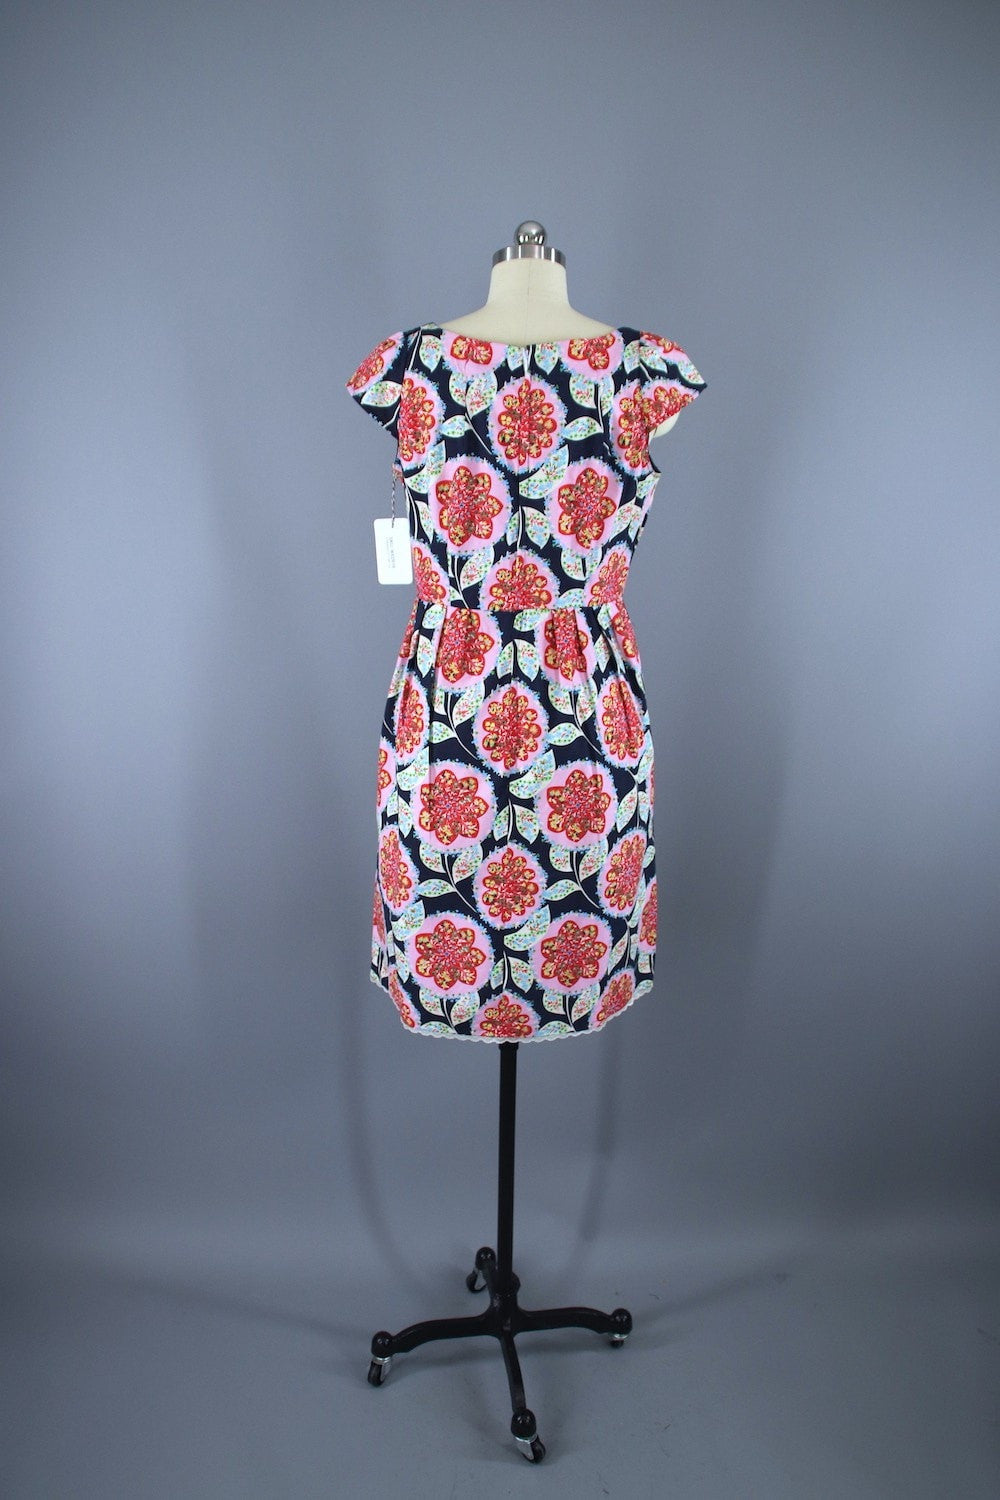 Vintage 1950s Floral Print Cotton Day Dress - ThisBlueBird